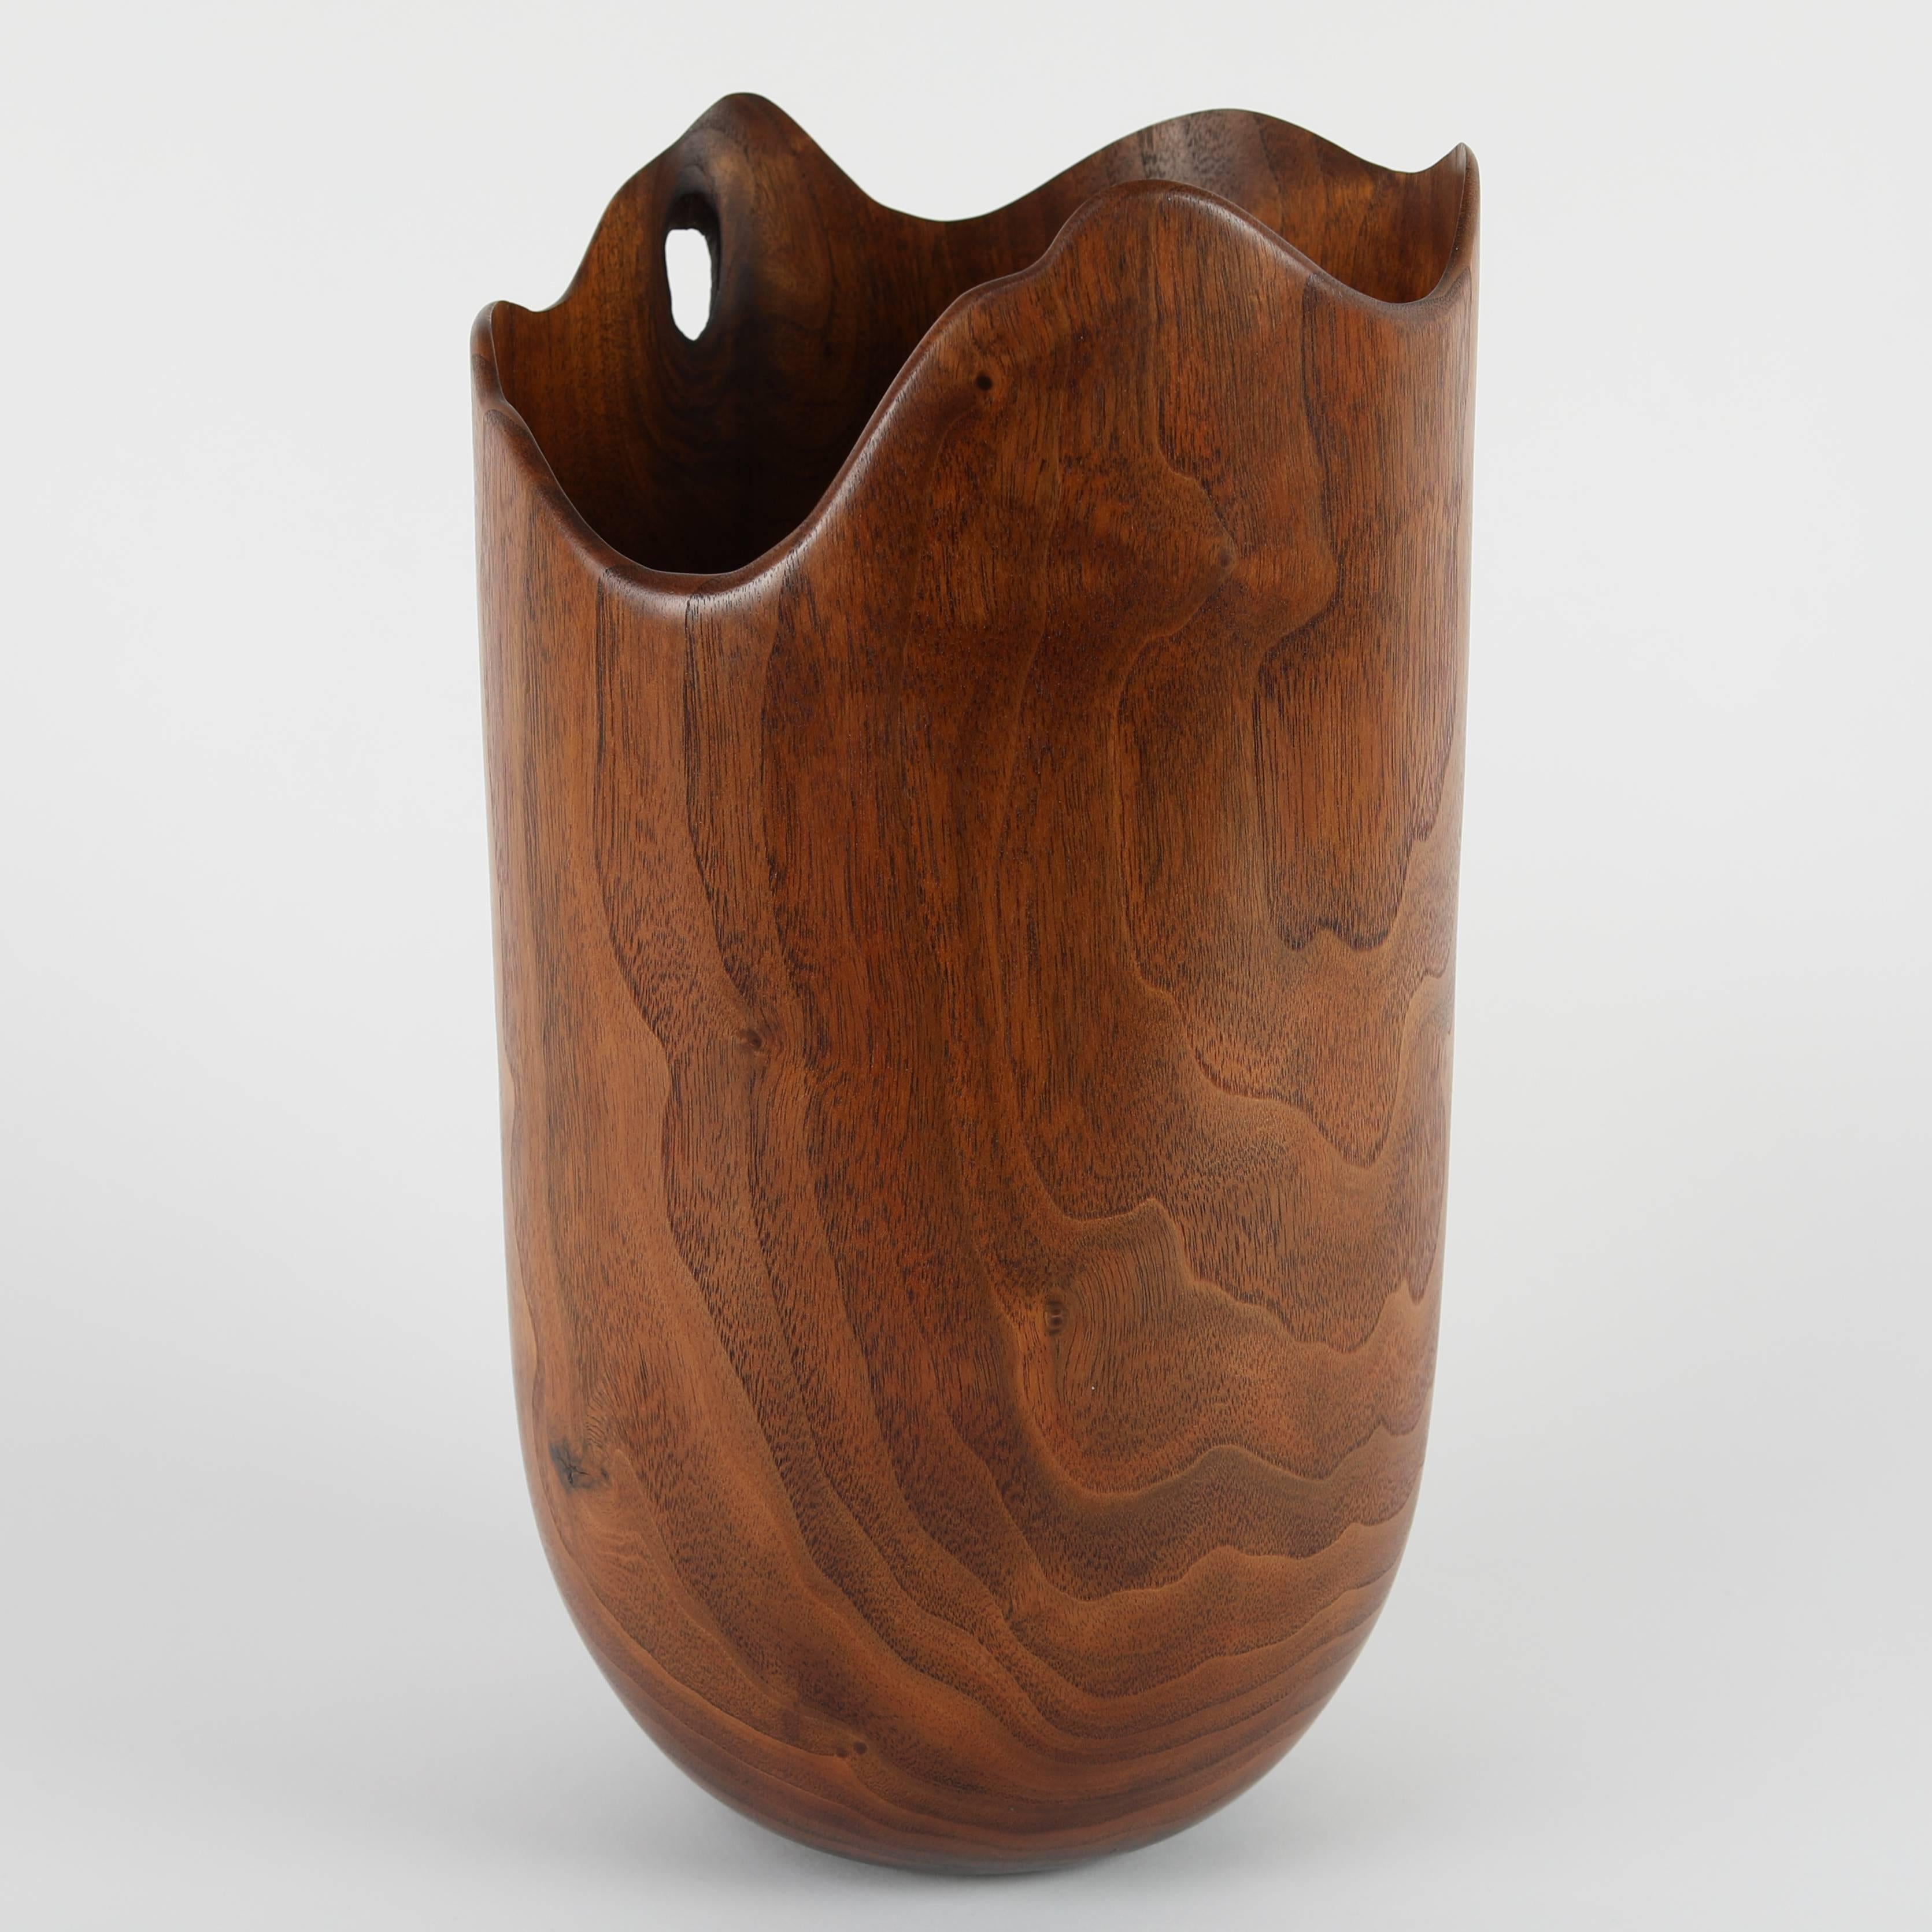 Hand-Carved Turned Walnut Vase with Free-Form Top by Mike Kornblum